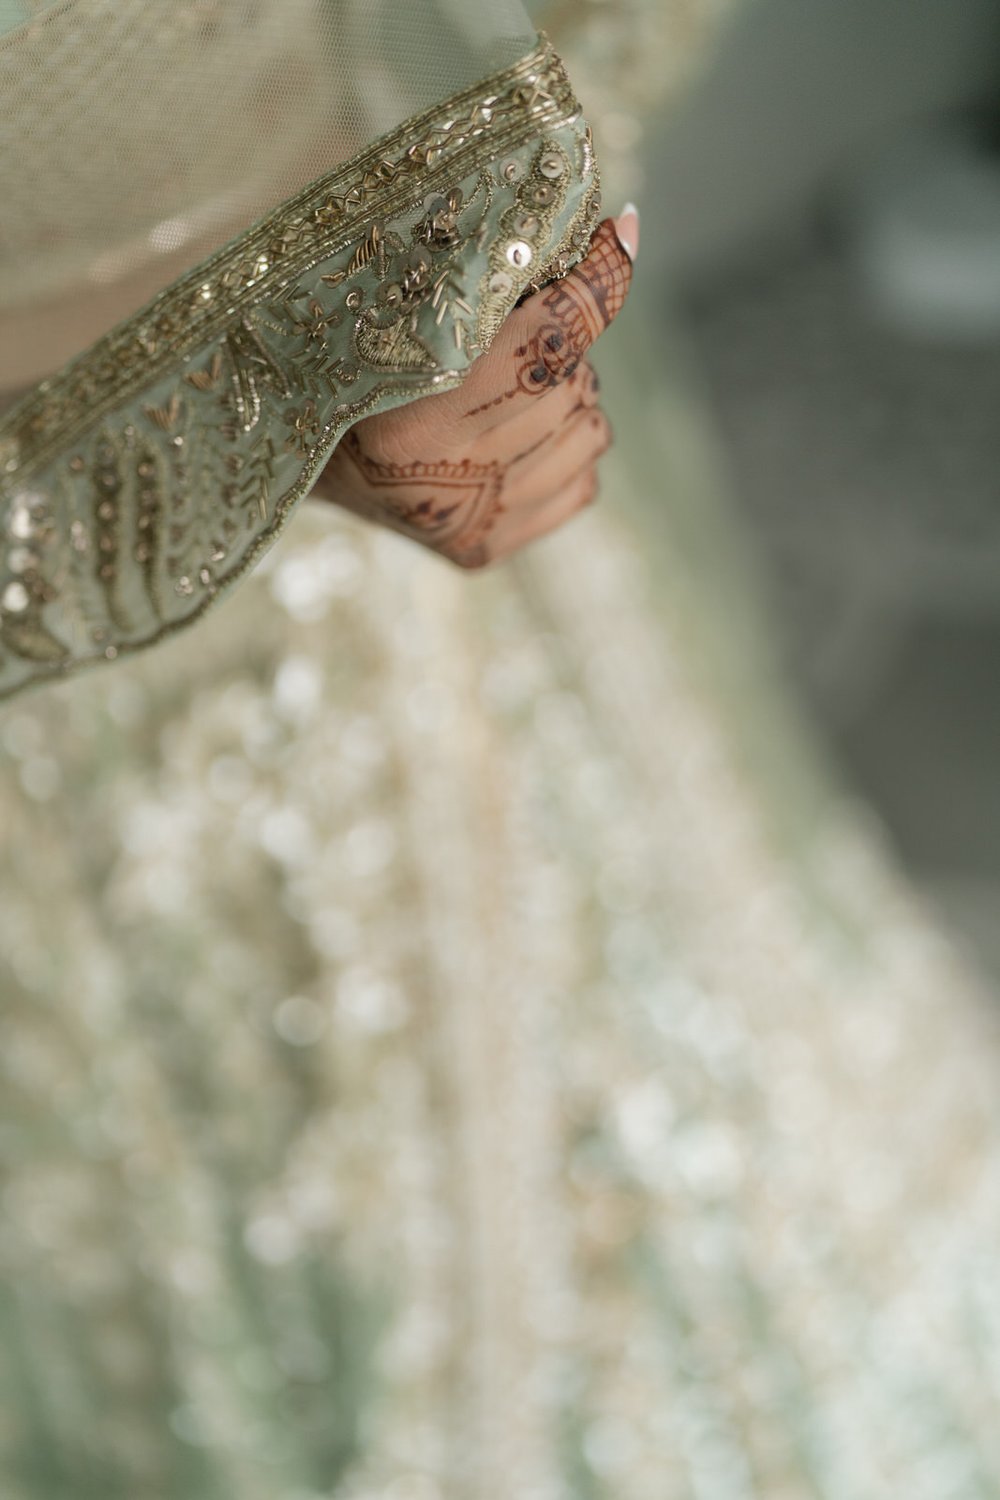 Luxury Indian Wedding in Miami Florida - Indian wedding photographer miami florida - michelle gonzalez photography - loews hotel in coral gables wedding-17.jpg